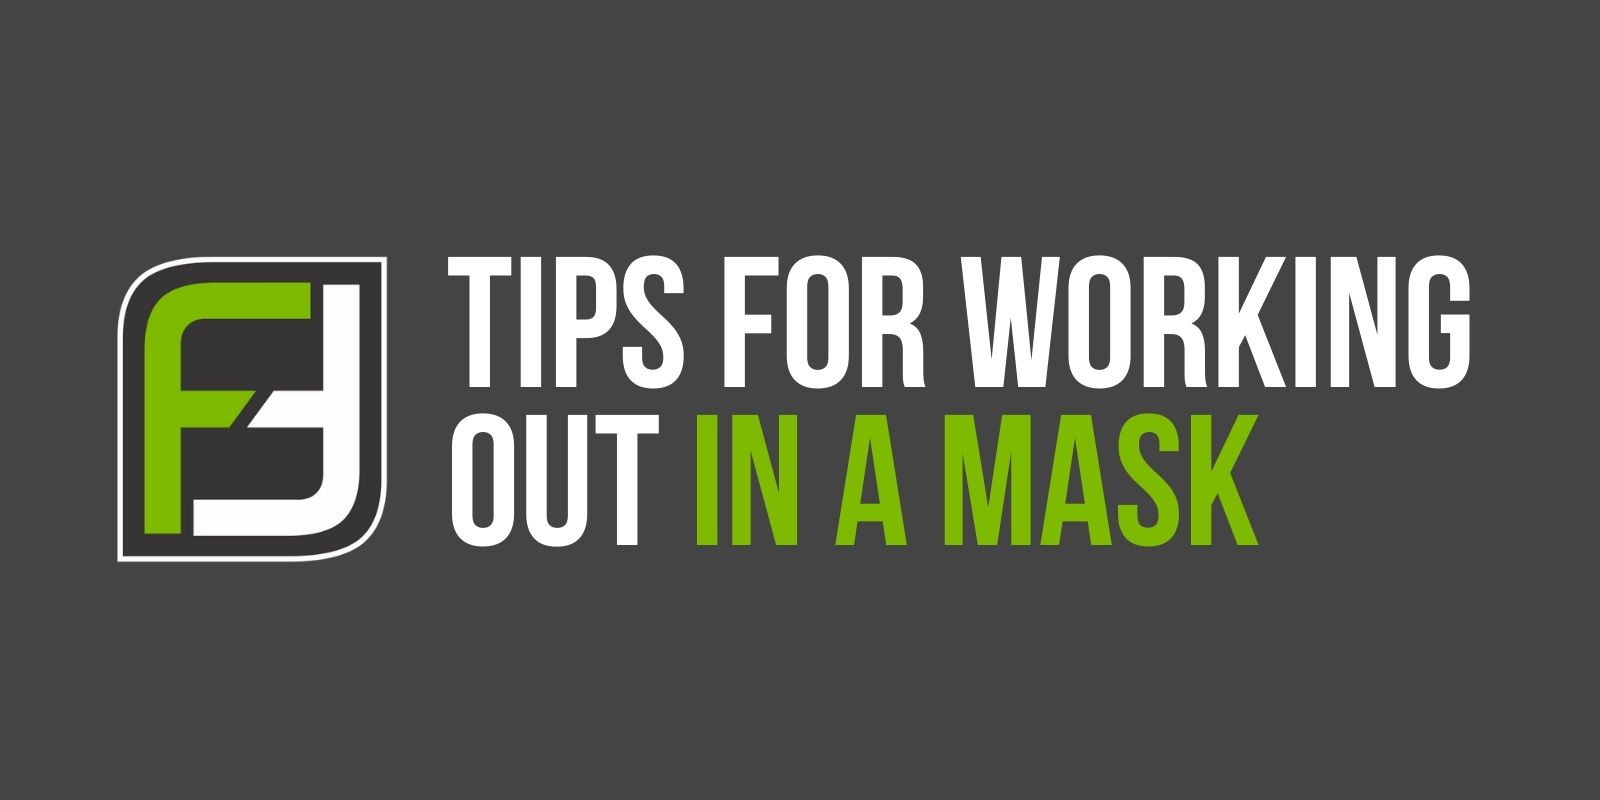 Tips For Working Out In A Mask